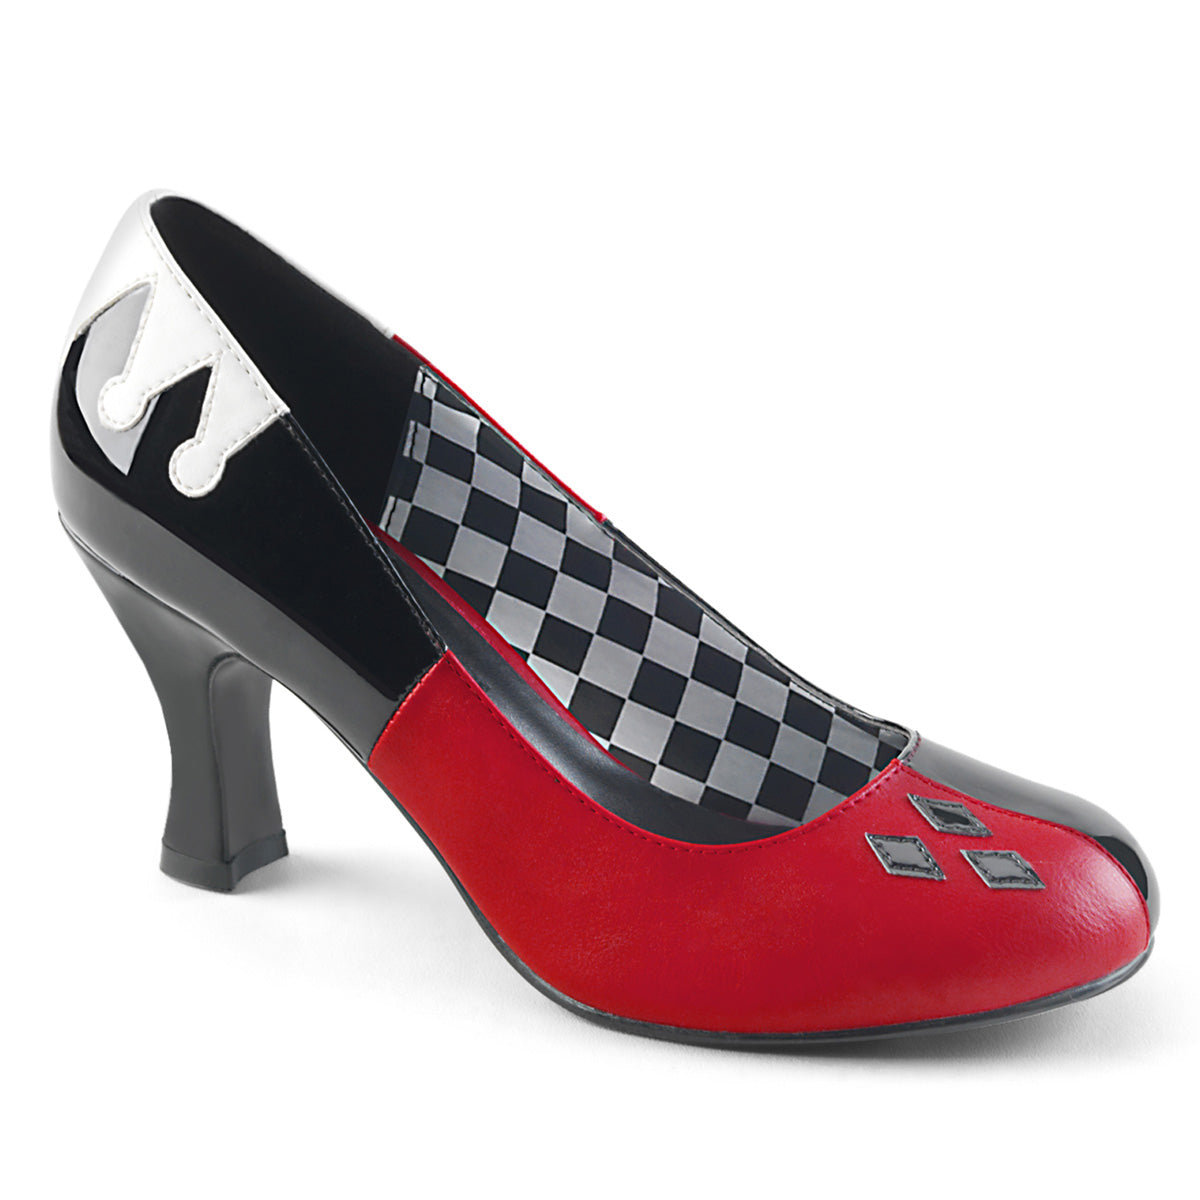 HARLEY-42 Pleasers Funtasma 3" Heel Black and Red Women's Sexy Shoes